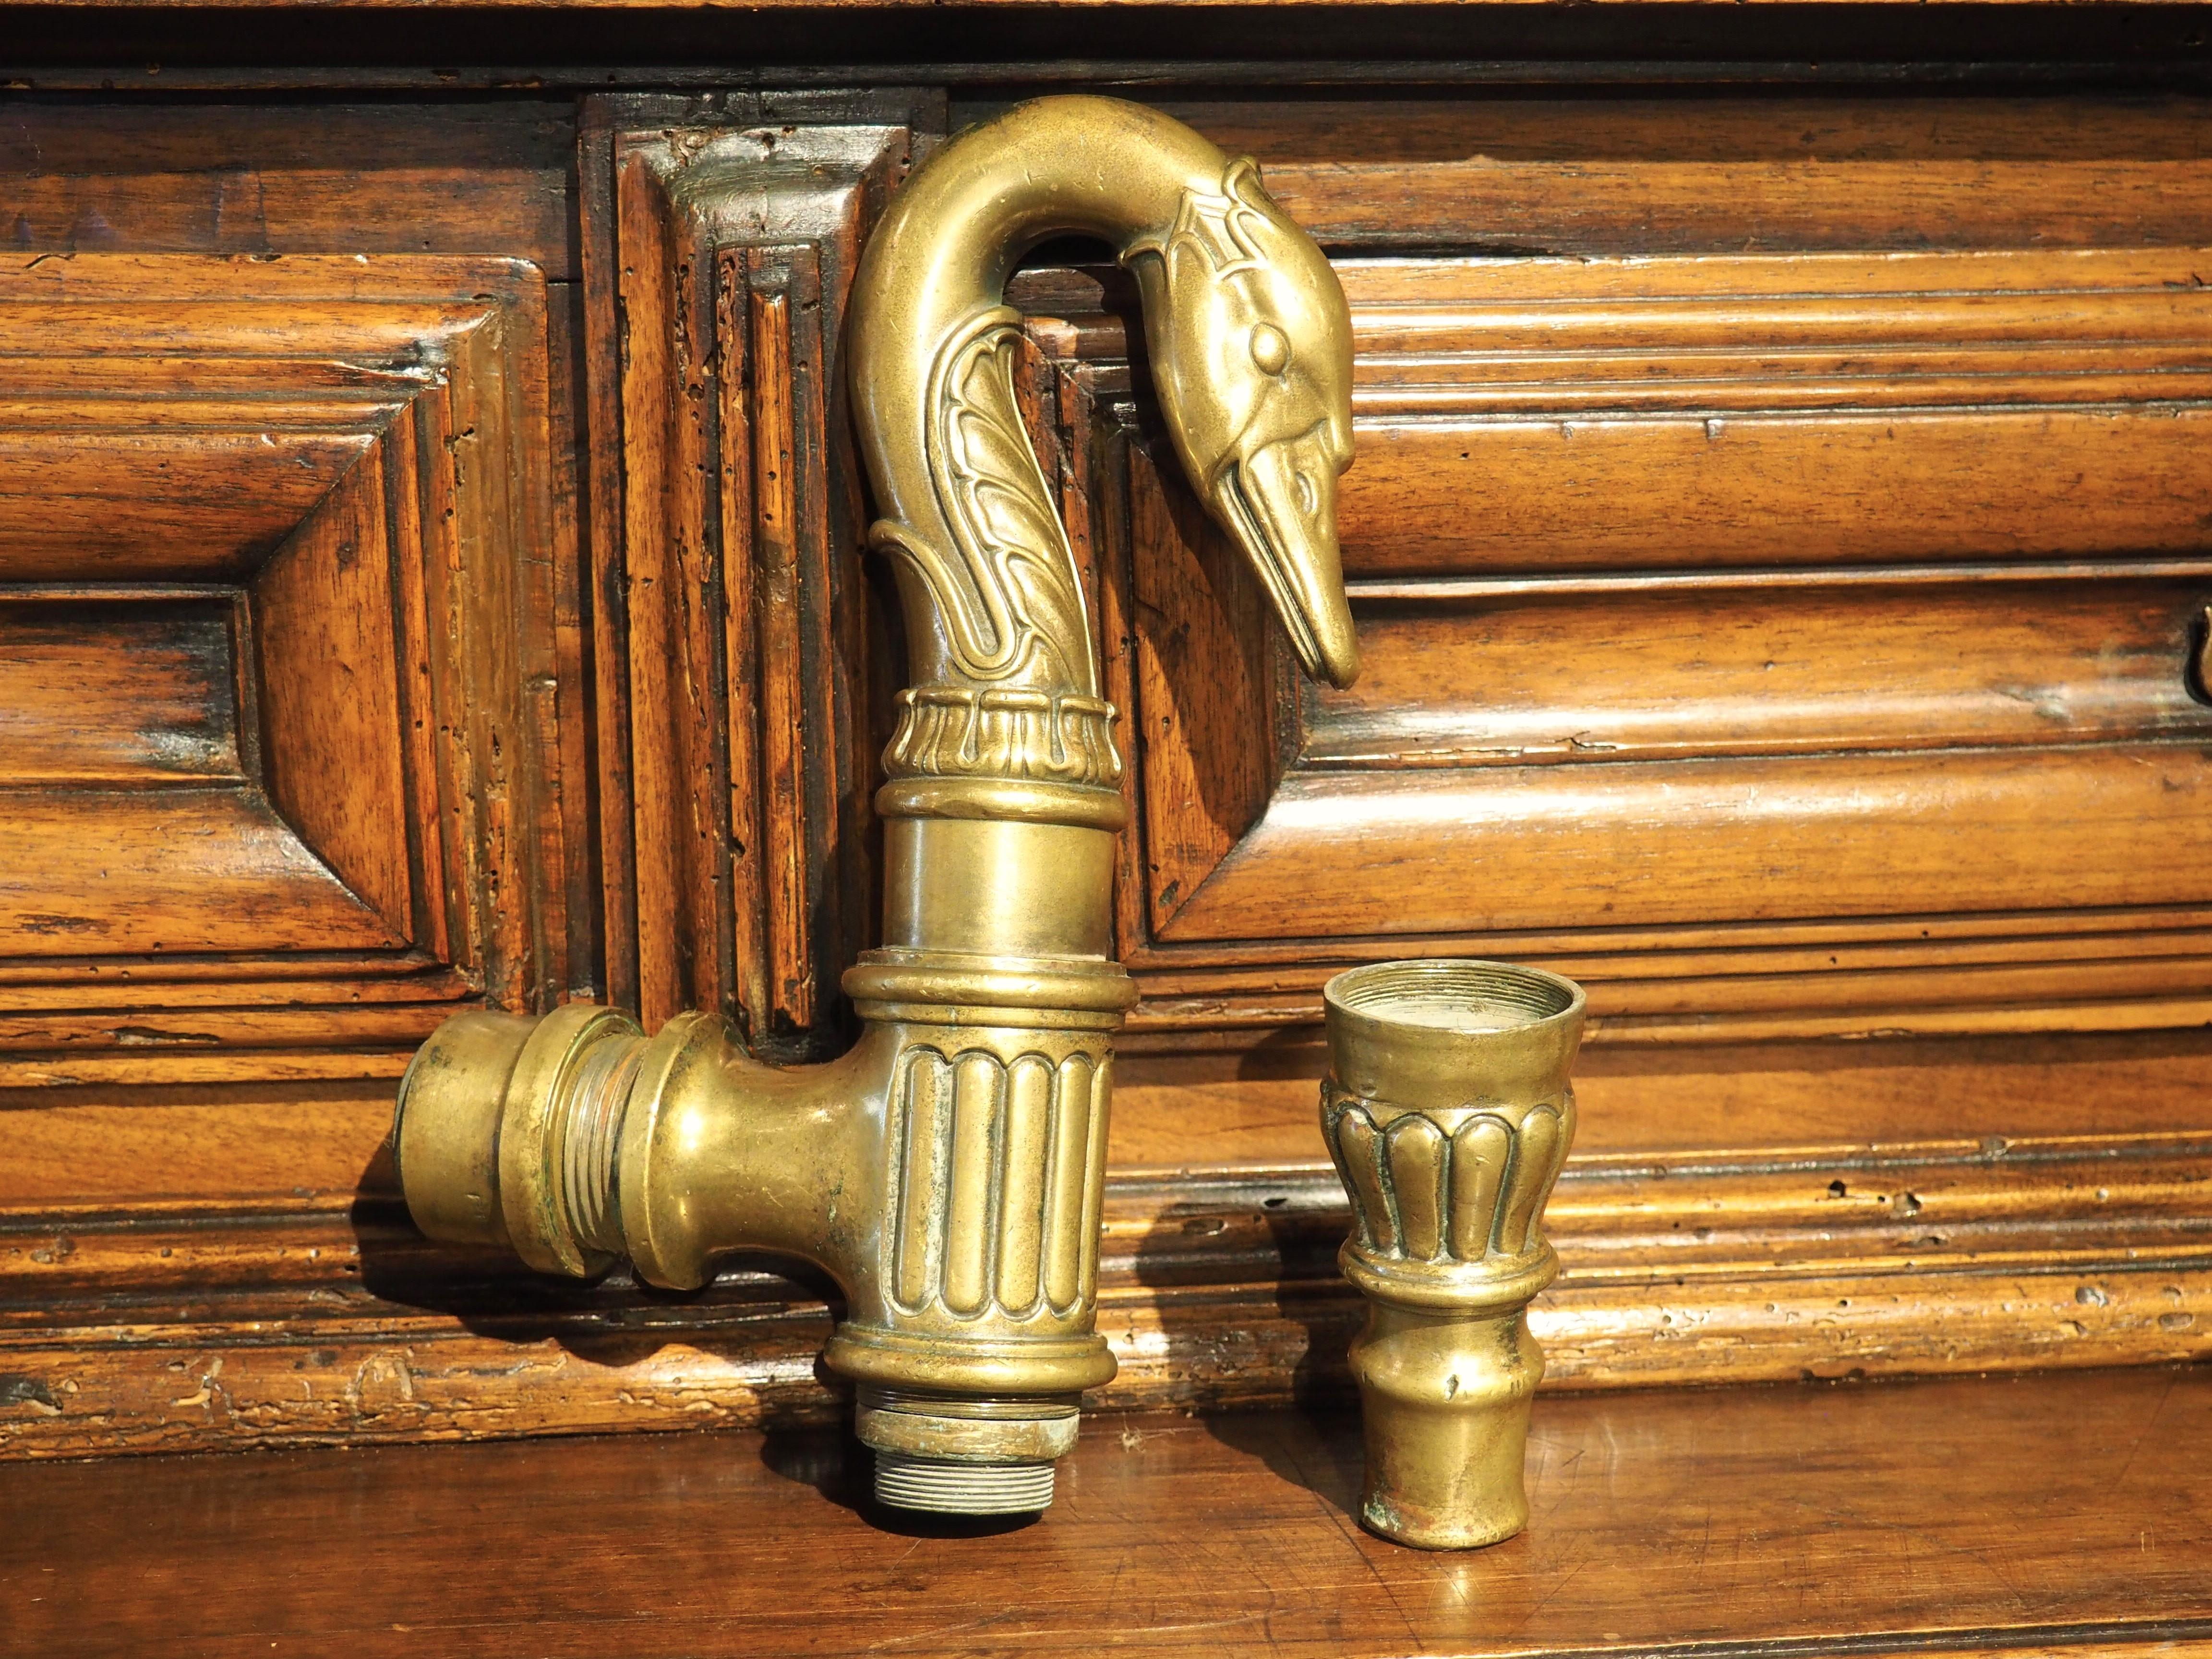 A unique French faucet tap dating to circa 1820, this highly detailed spout has the appearance of a swan with a craned neck. Swan motifs were sometimes seen during the Empire period, as it was stated that Napoleon’s first wife, Josephine, favored